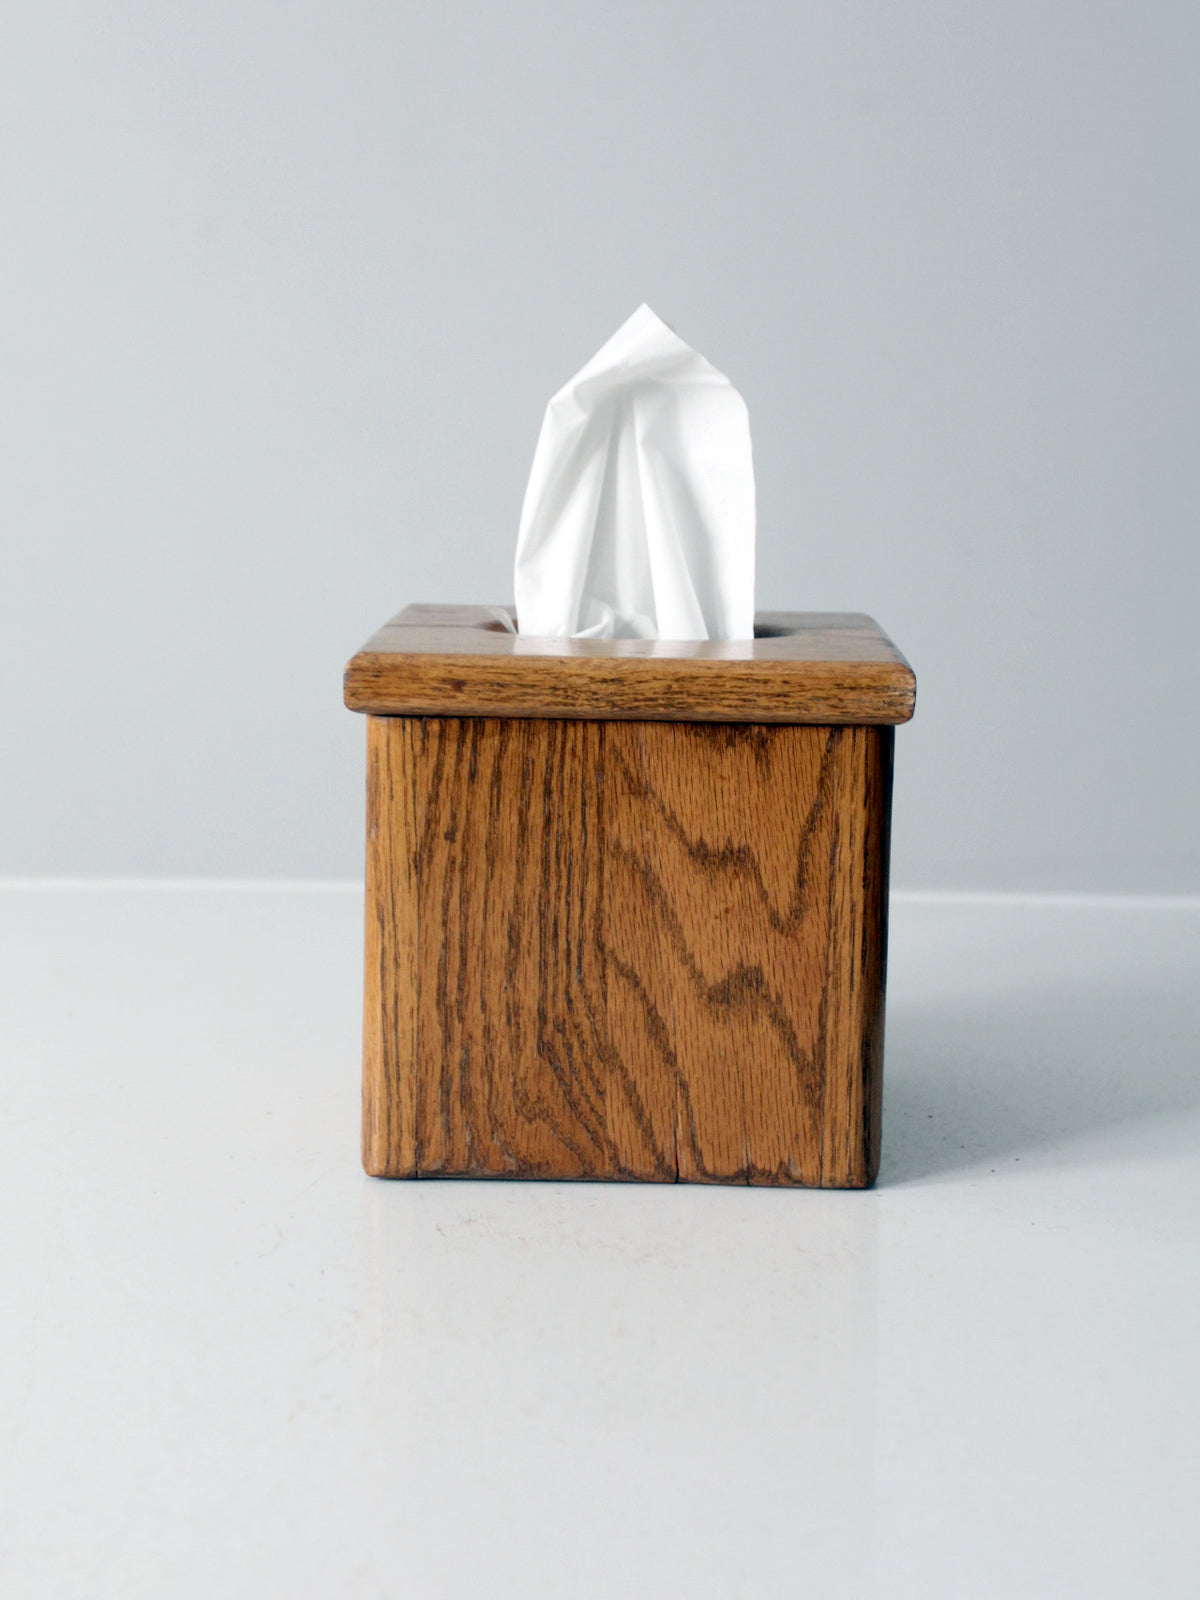 vintage wood tissue box cover